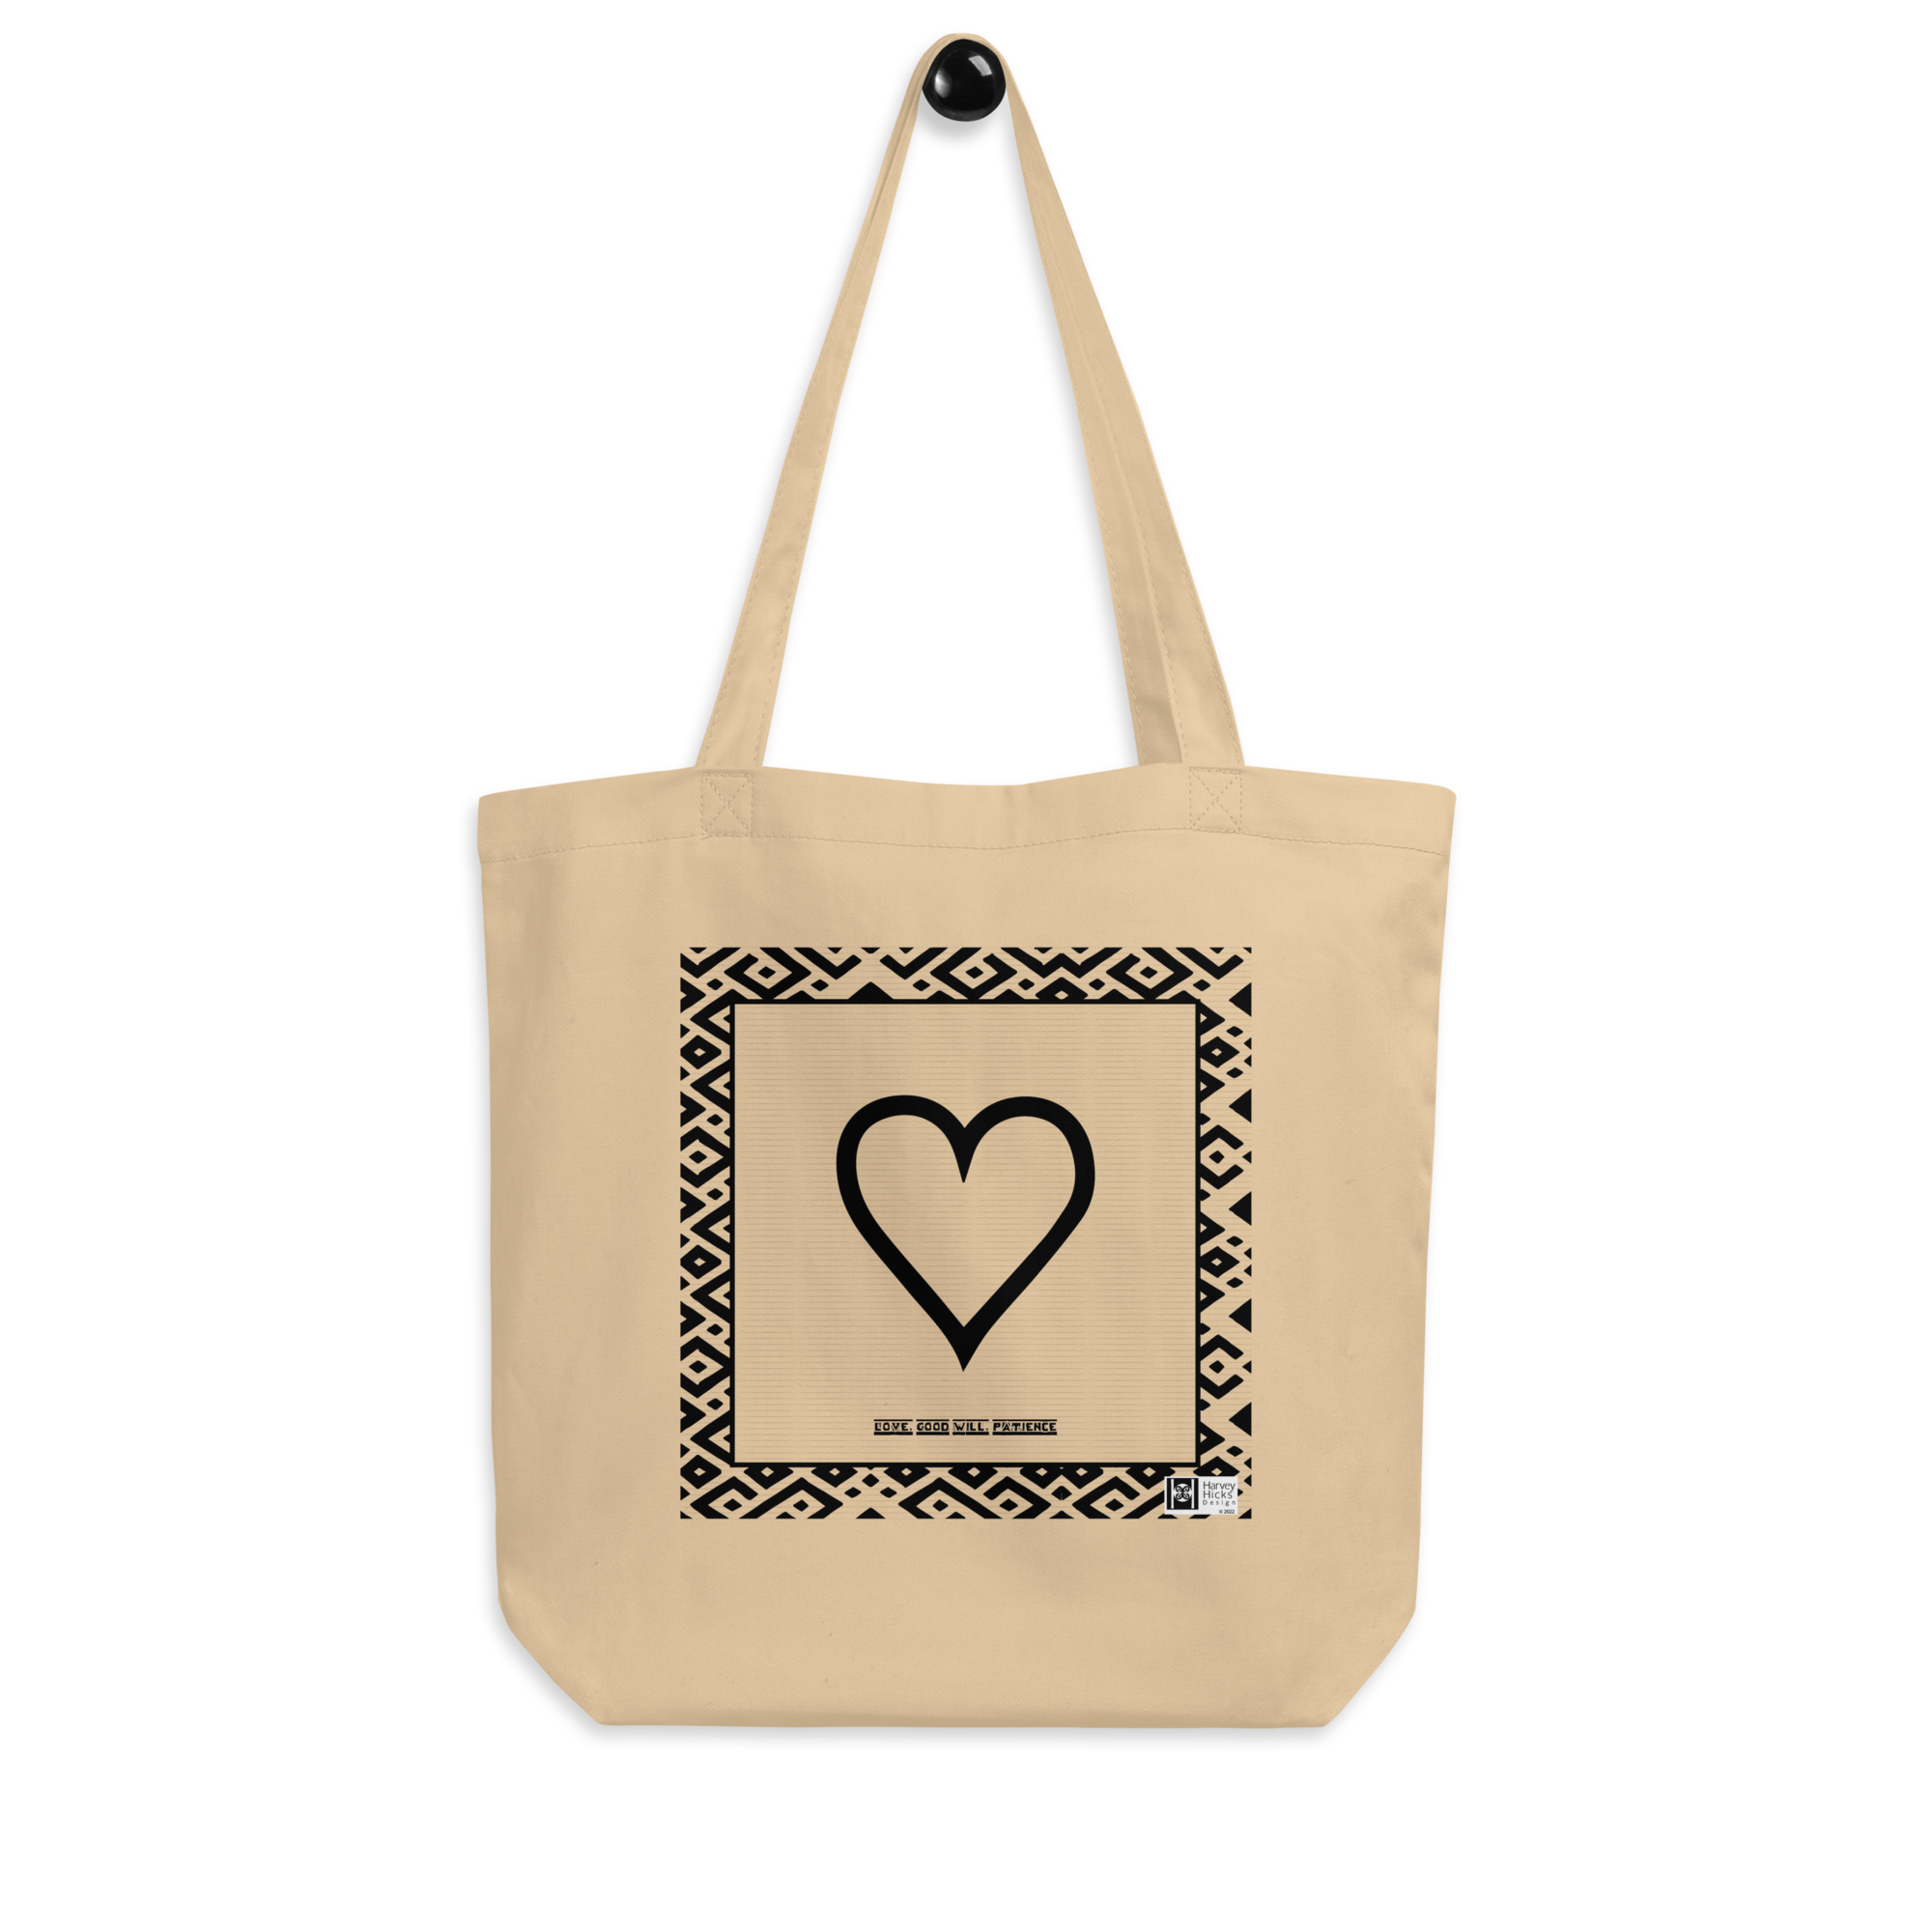 100% cotton Eco Tote Bag, featuring the Adinkra symbol for good will